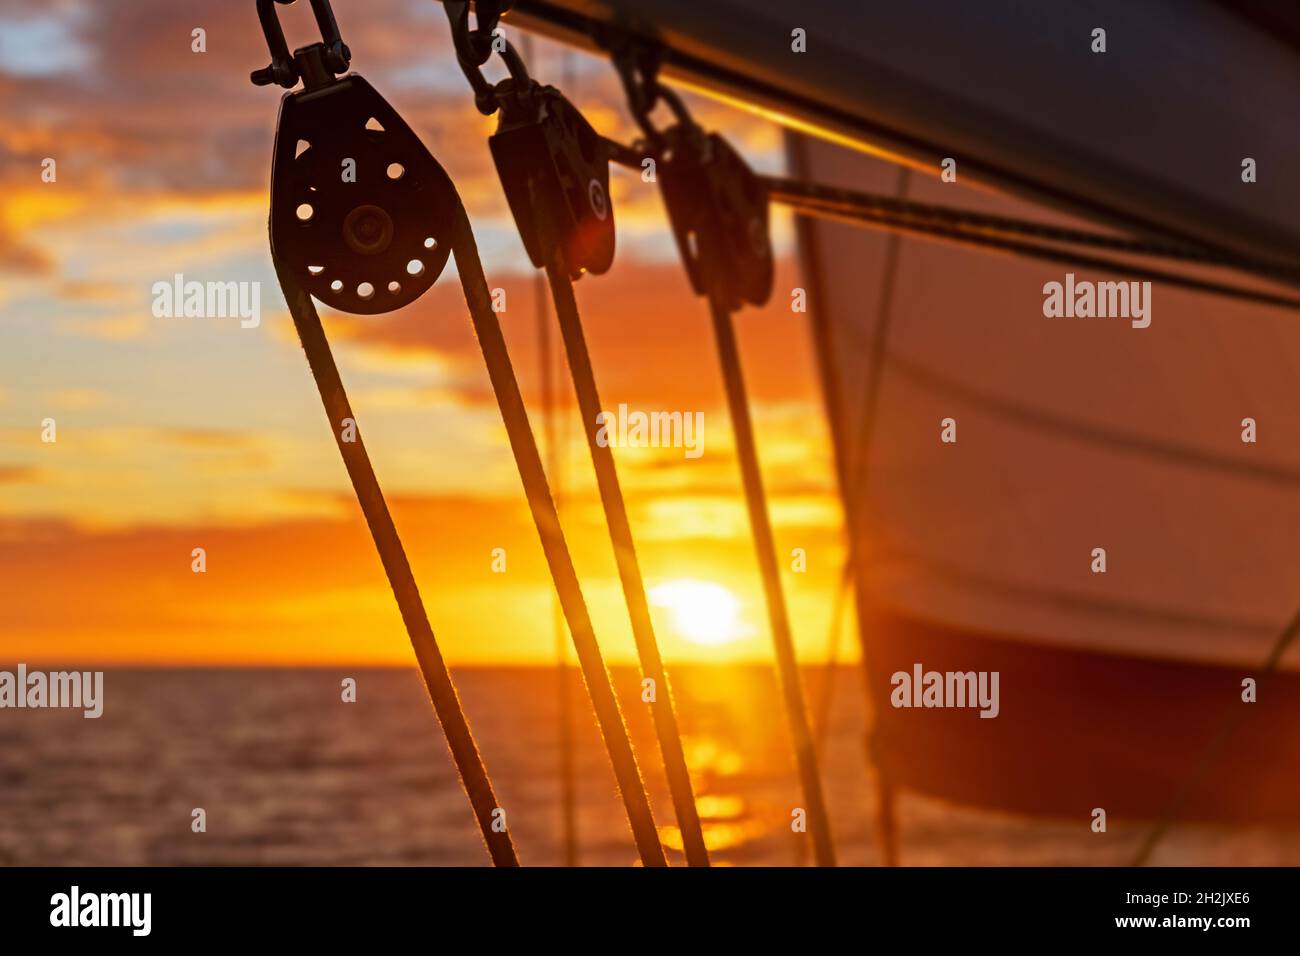 Close up of sailing boat blocks / sailboat pulleys silhouetted against orange sunset sky over the Caribbean Sea Stock Photo